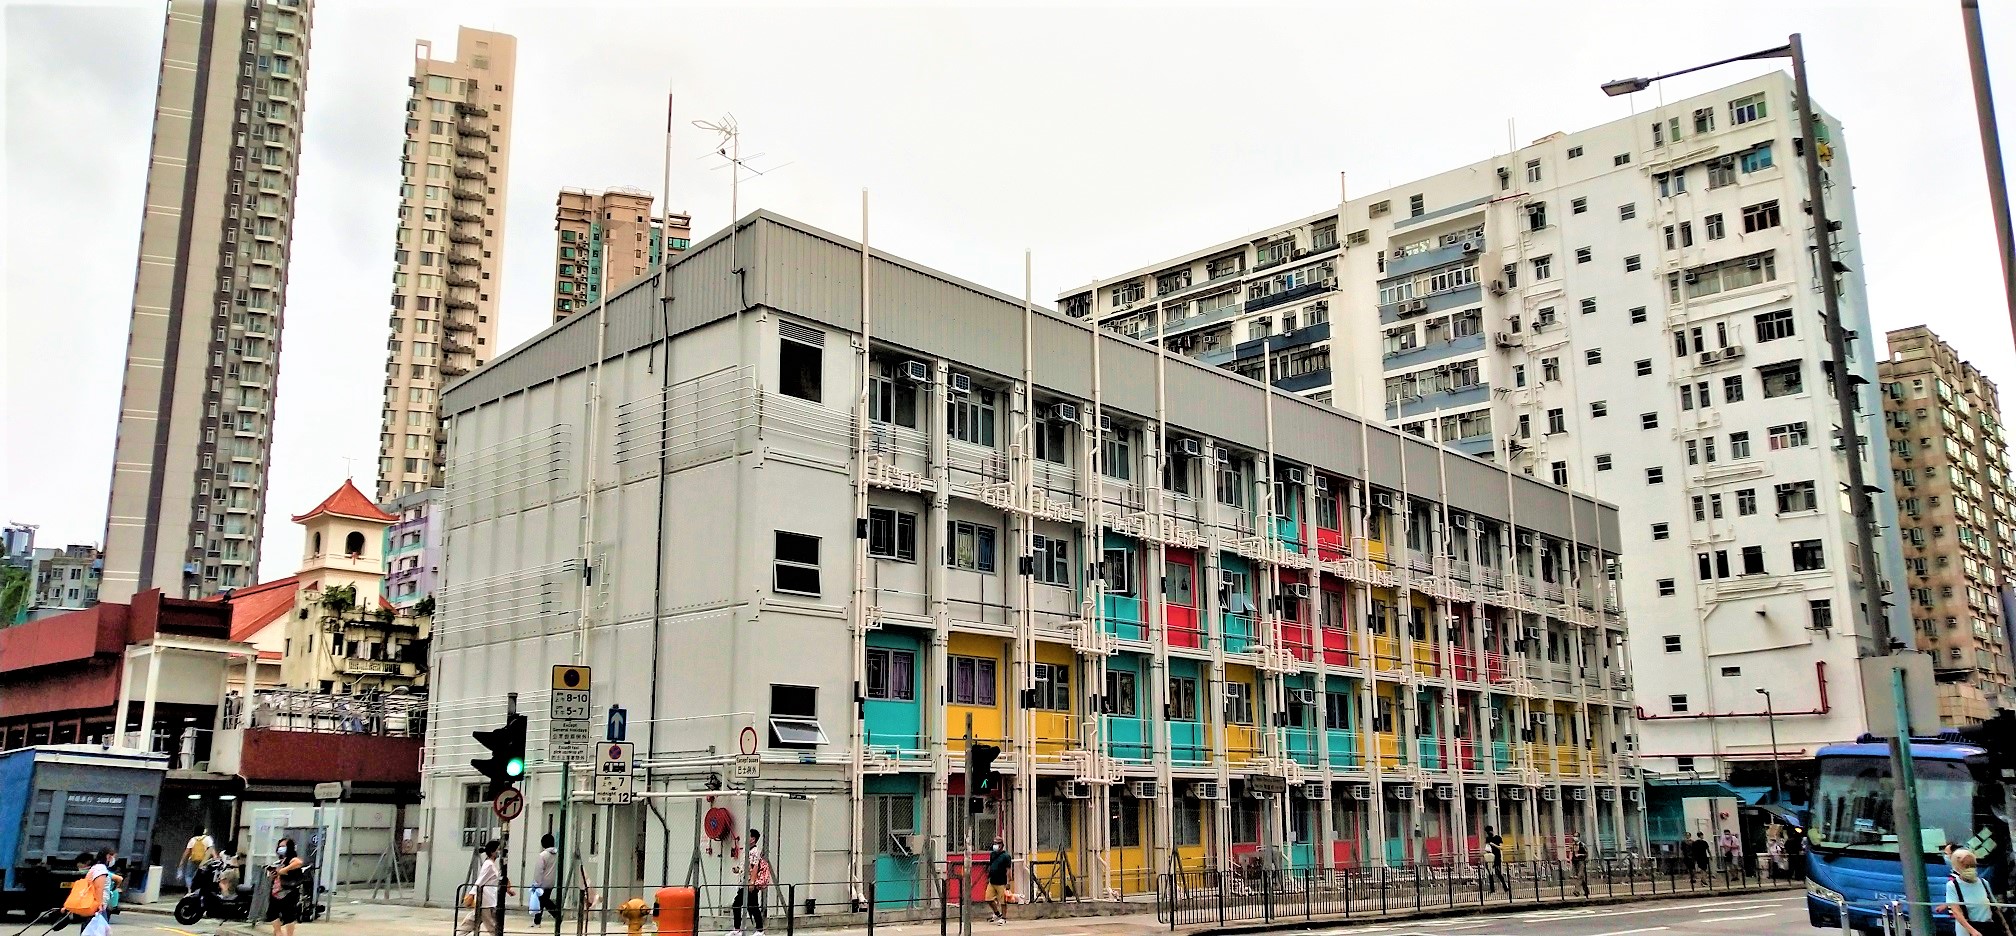 Transitional housing for the poor is near other old and new private residential buildings